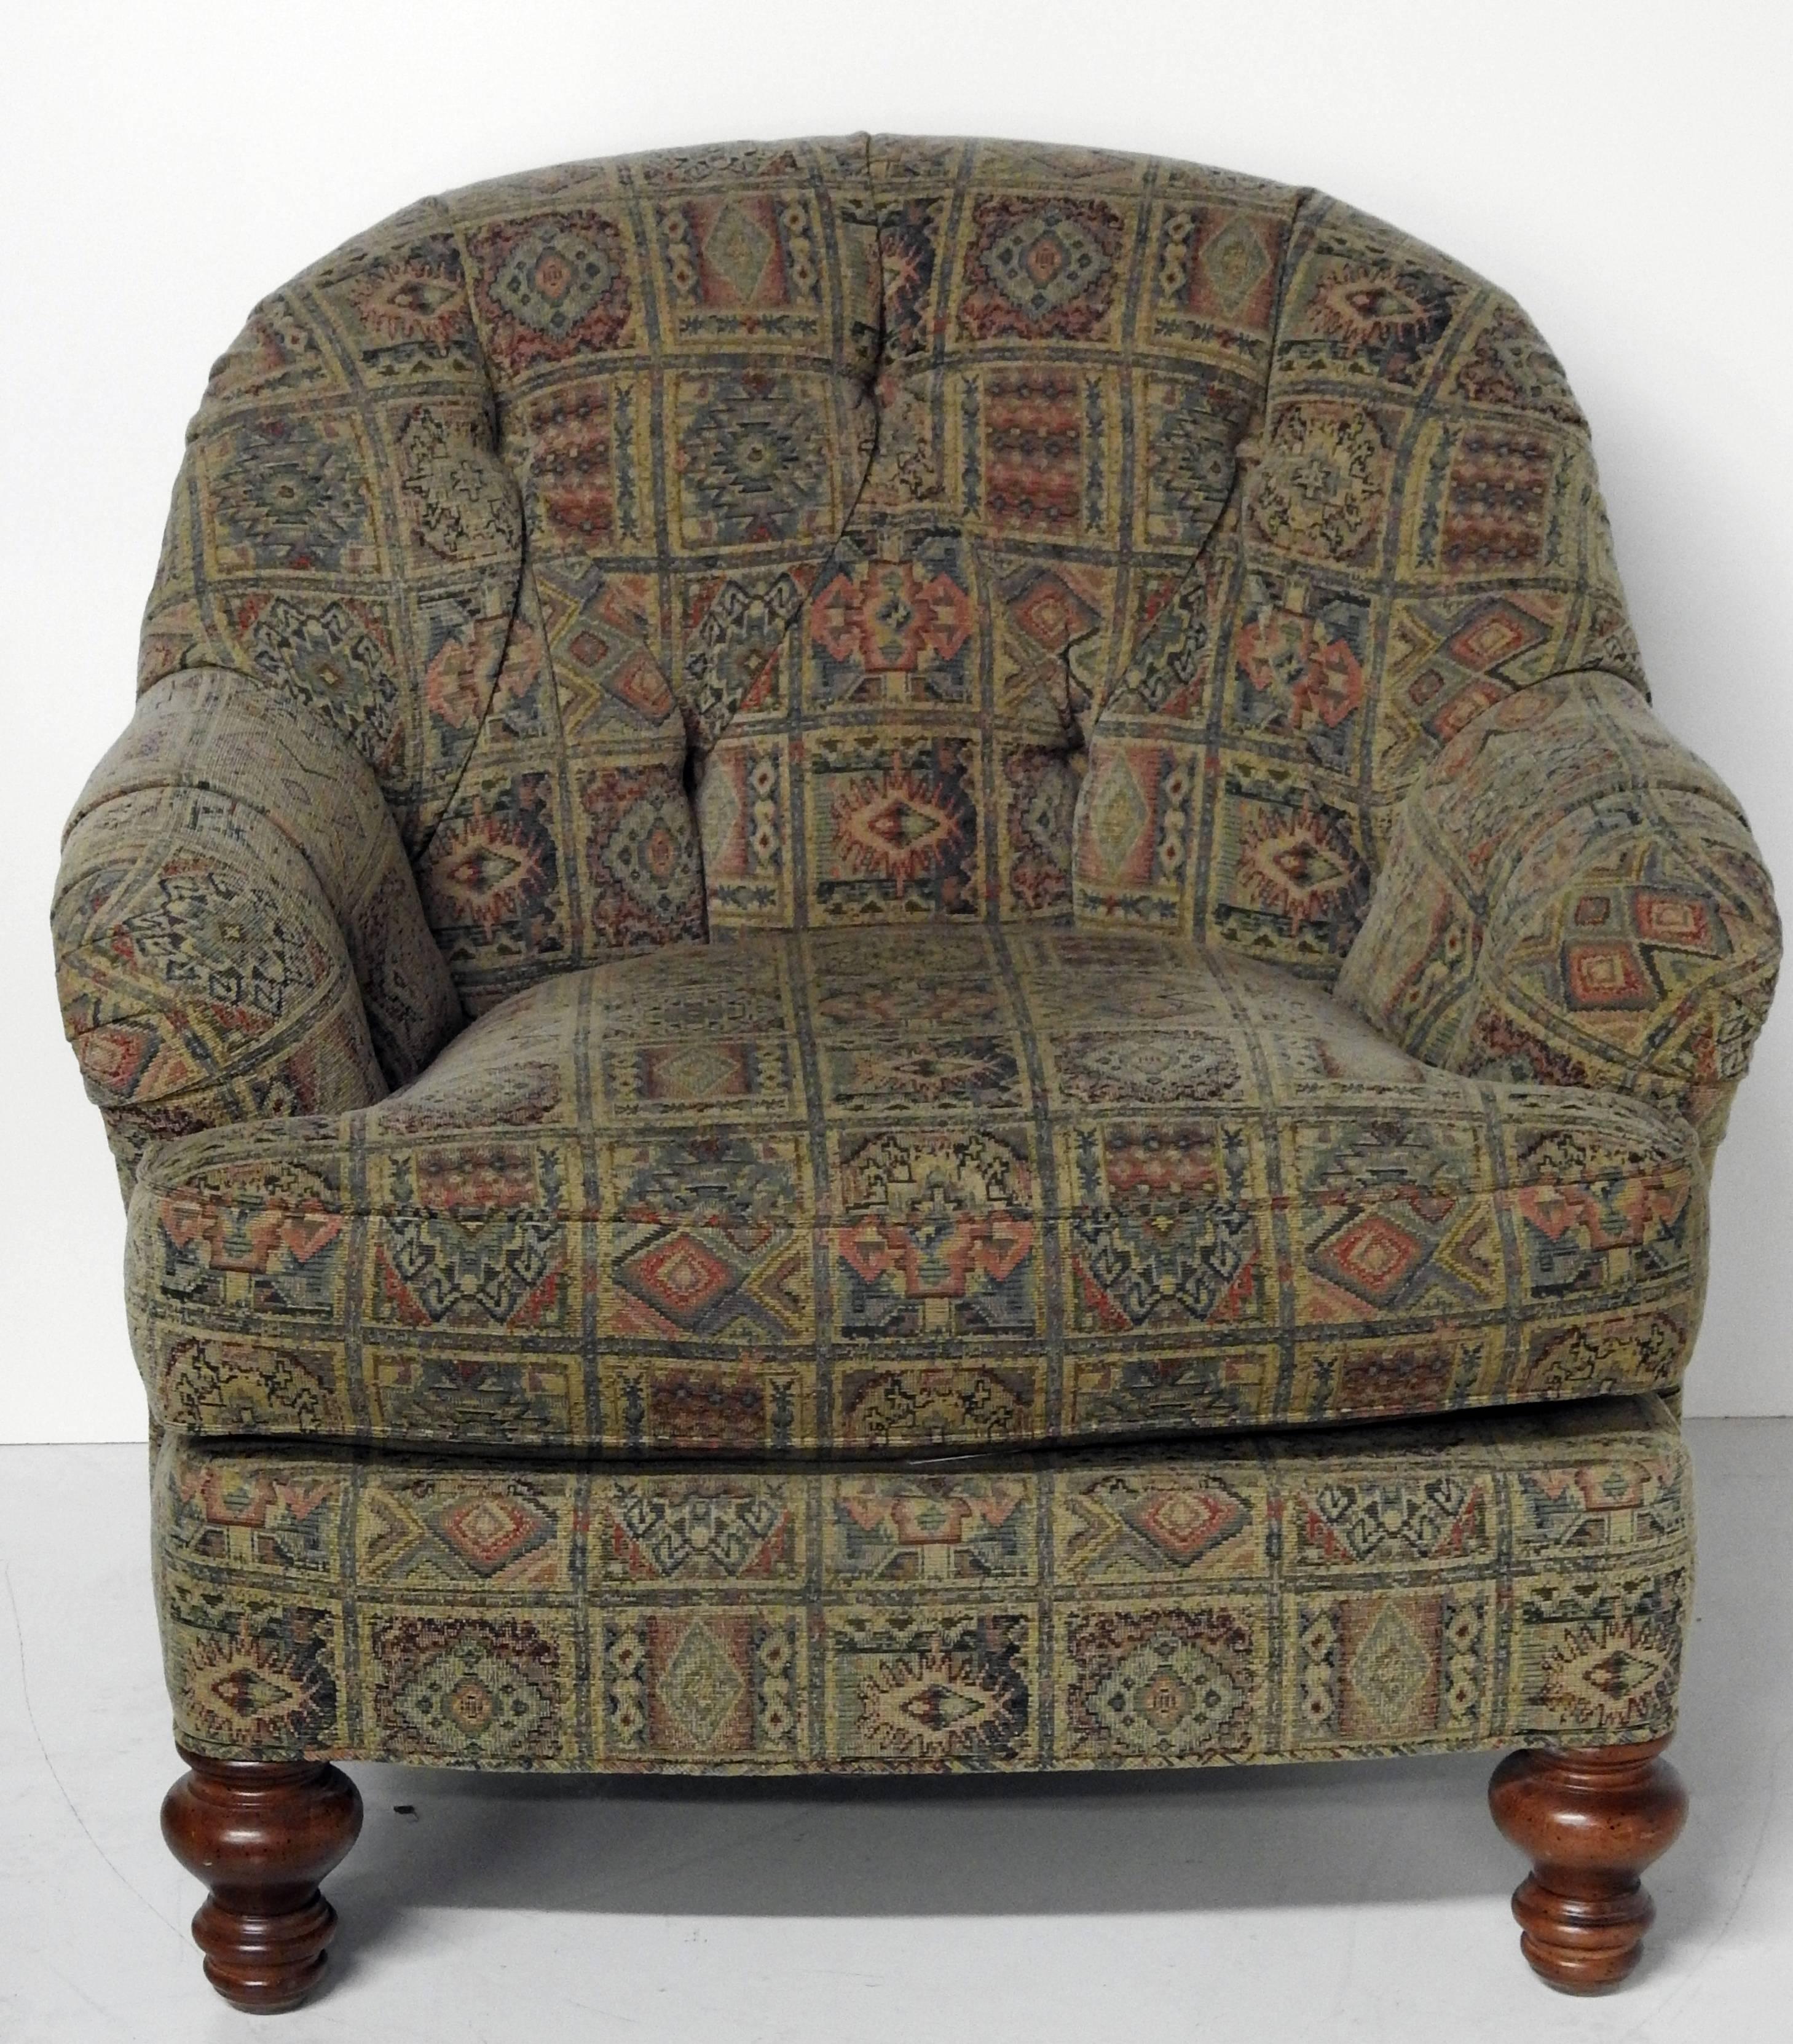 Pair of William IV style club chairs and ottoman with intentionally worn southwestern patterned machined tapestry upholstery on walnut legs by Sherrill. The ottoman measures: 33in W x 34in D x 16in H.